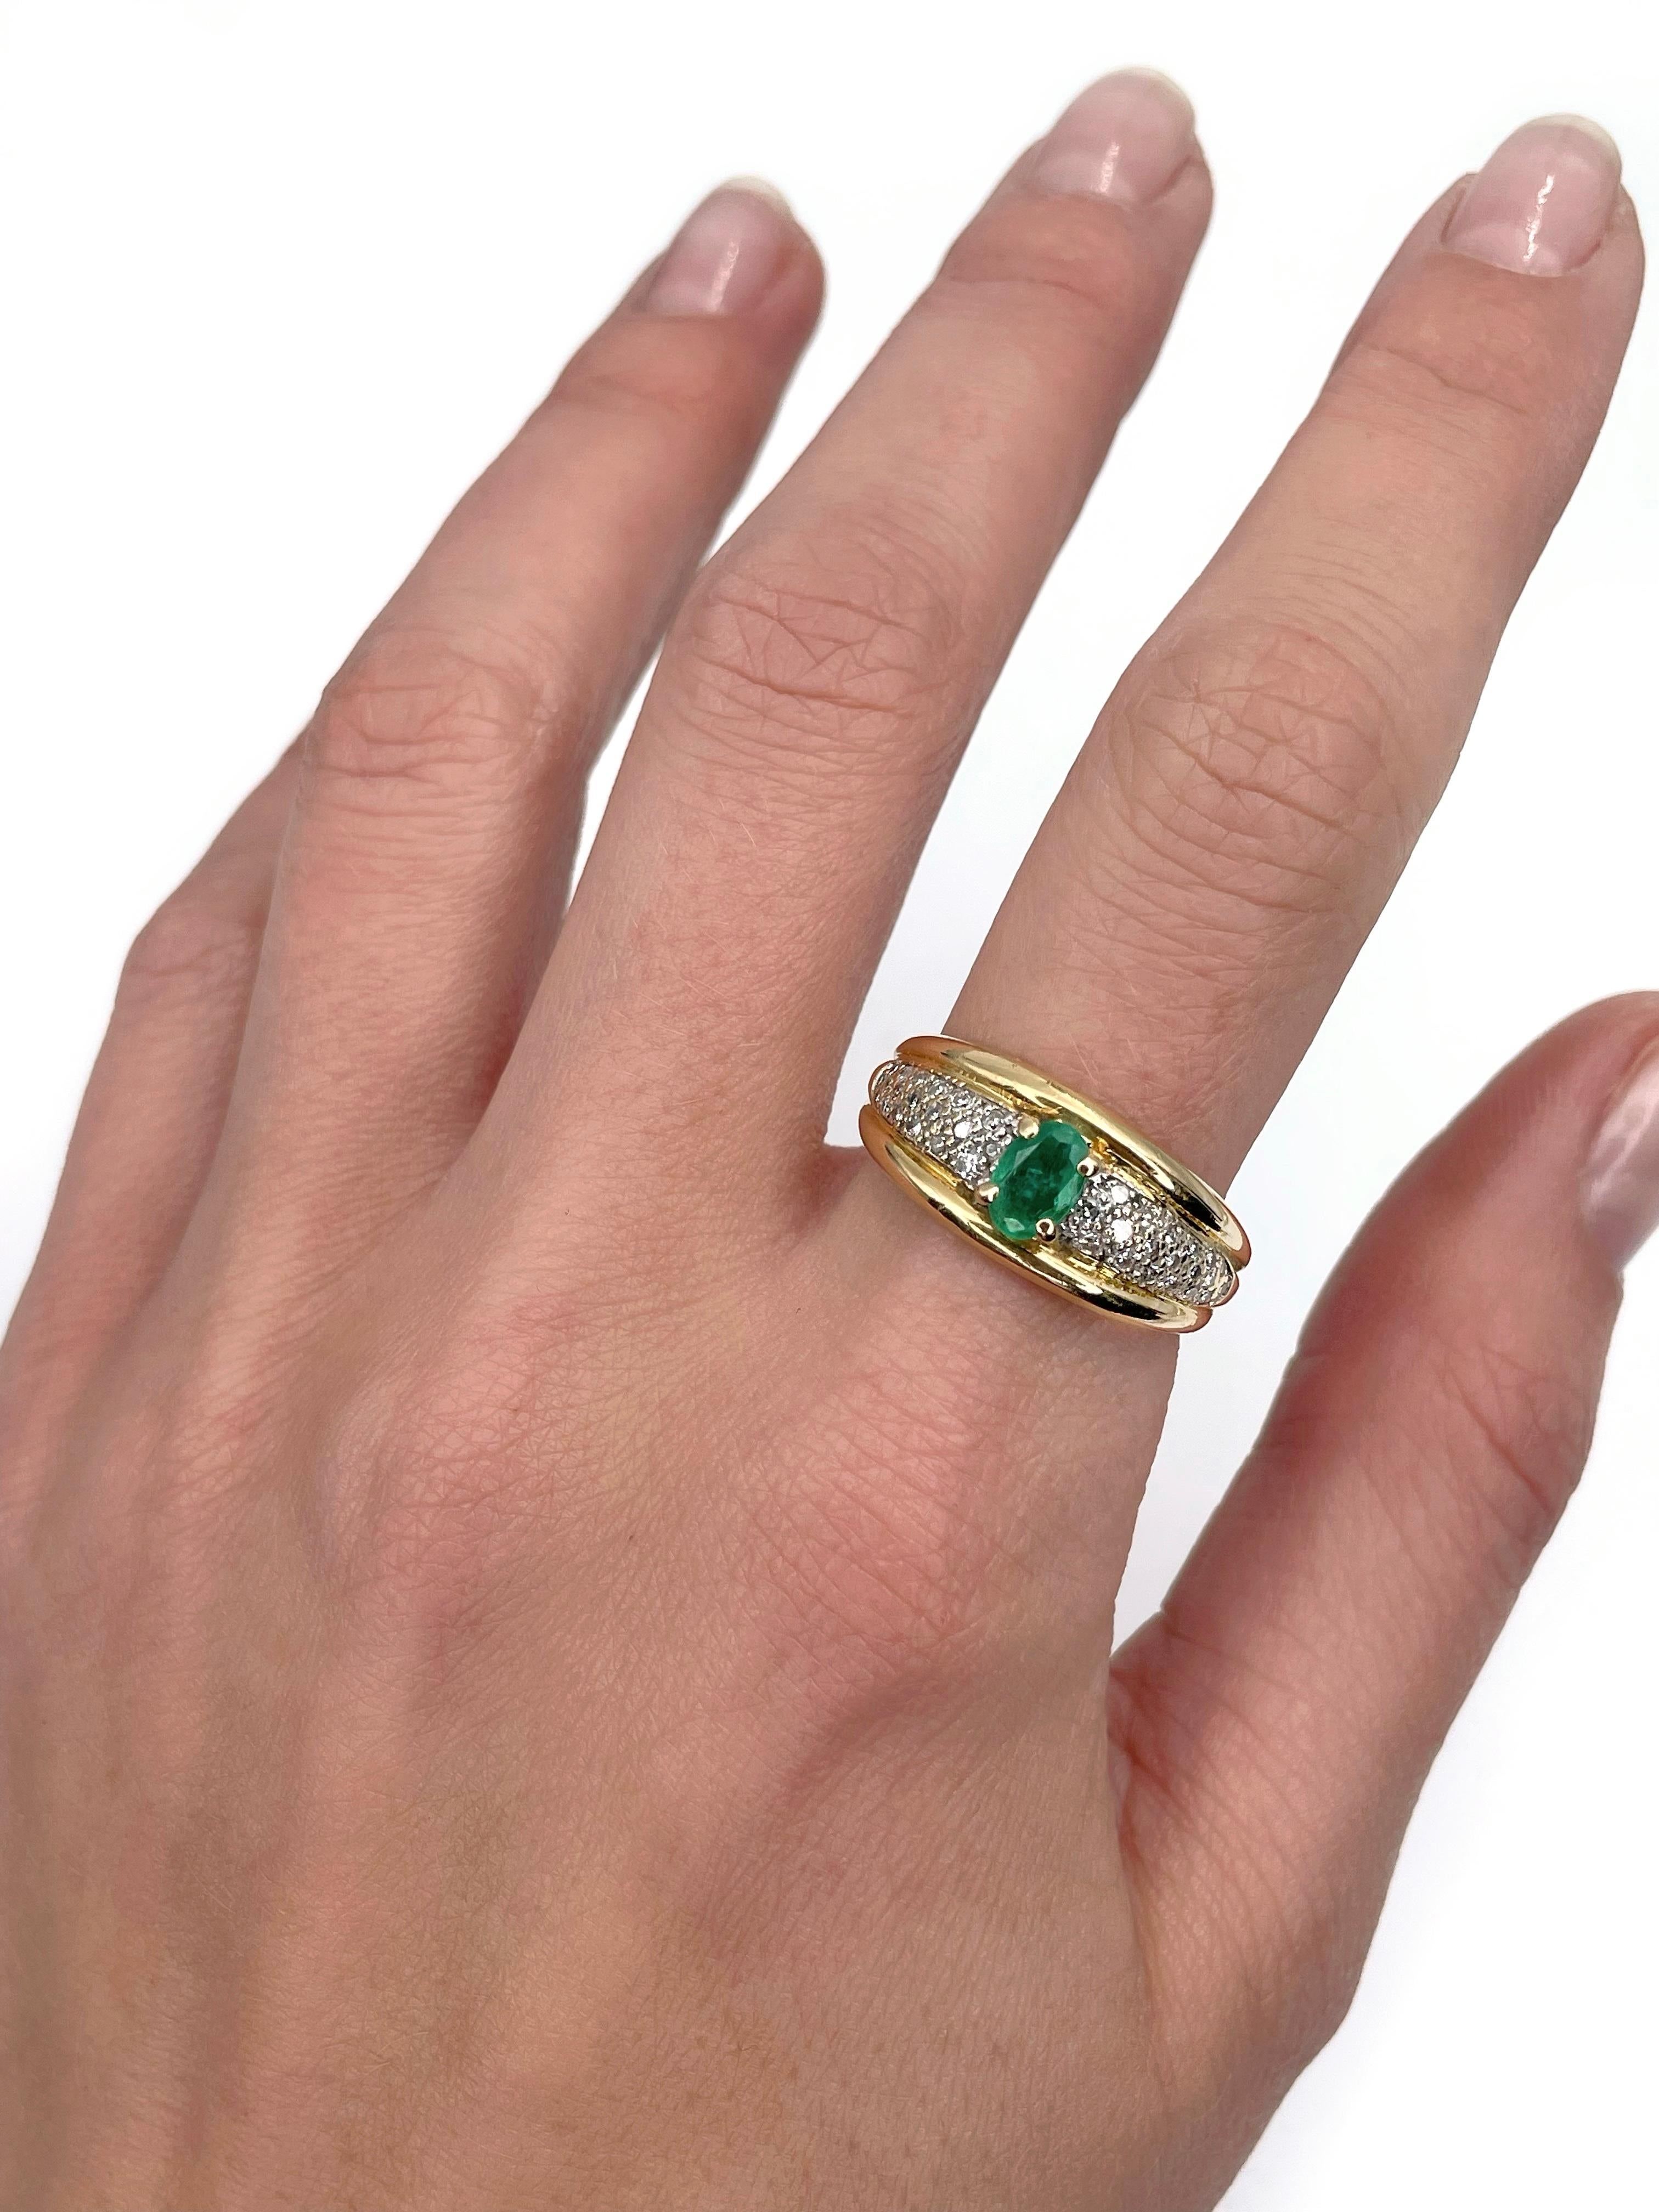 This is a vintage band ring crafted in 18K yellow gold. The piece features:
- 1 pc. emerald: oval cut, 0.45ct, vslbG 5/5, I1, F
- 38 pcs., diamonds: round cut, 17 facet, 0.19ct, RW-W, VS-SI2

Weight: 6.39g 
Size: 18.25 (US 8)

IMPORTANT: please ask